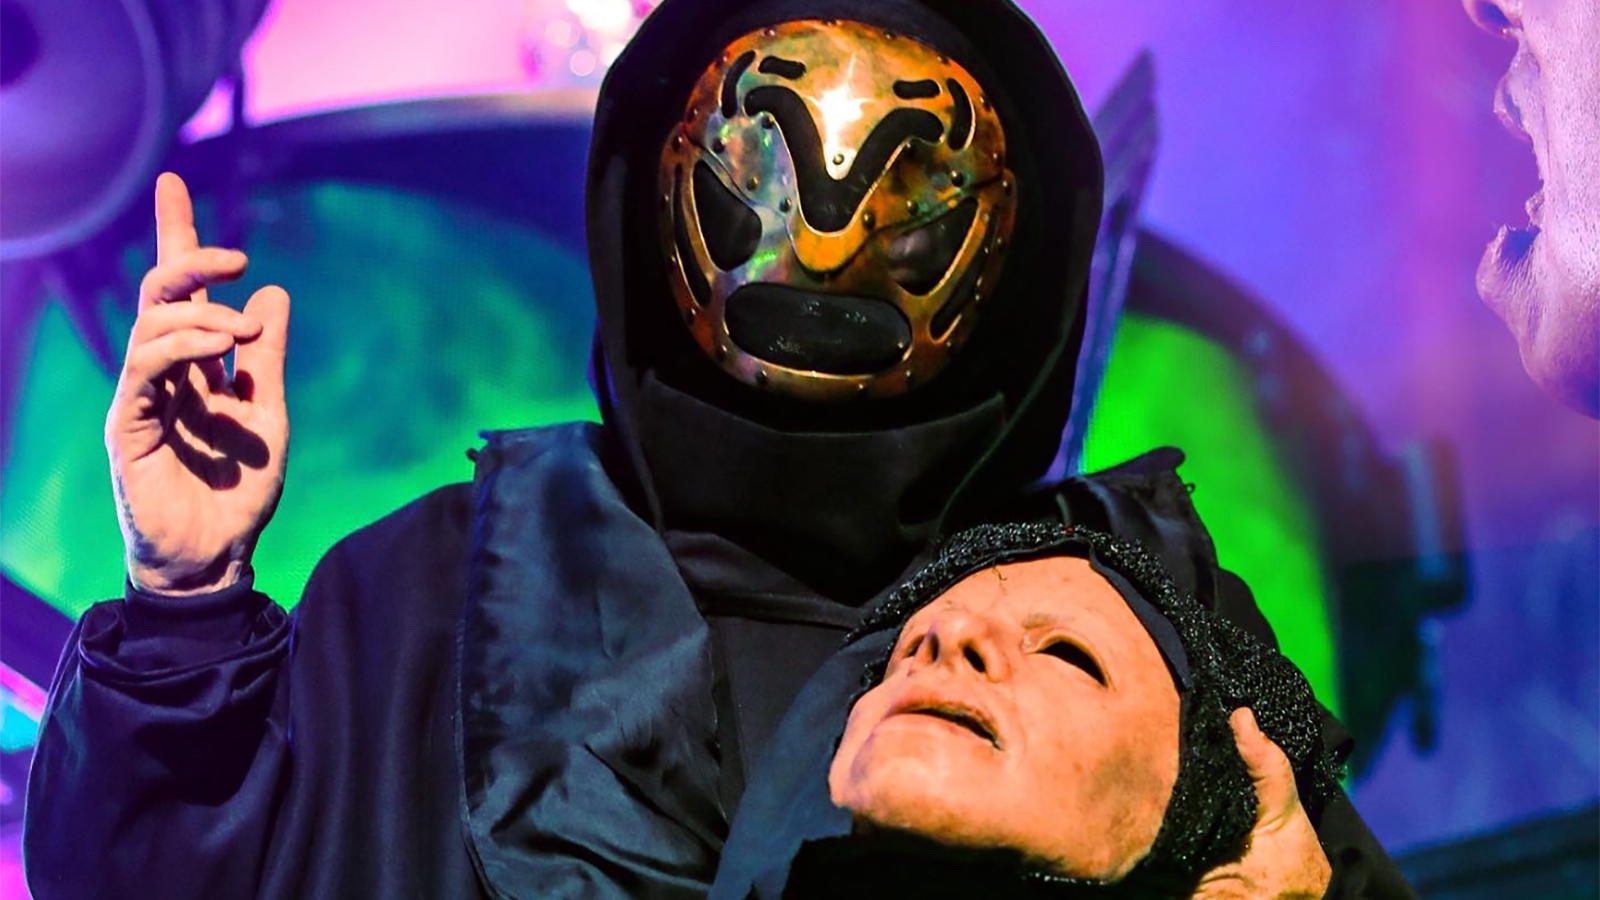 Sid Wilson's Disembodied Human Mask Sings Along to Slipknot Songs